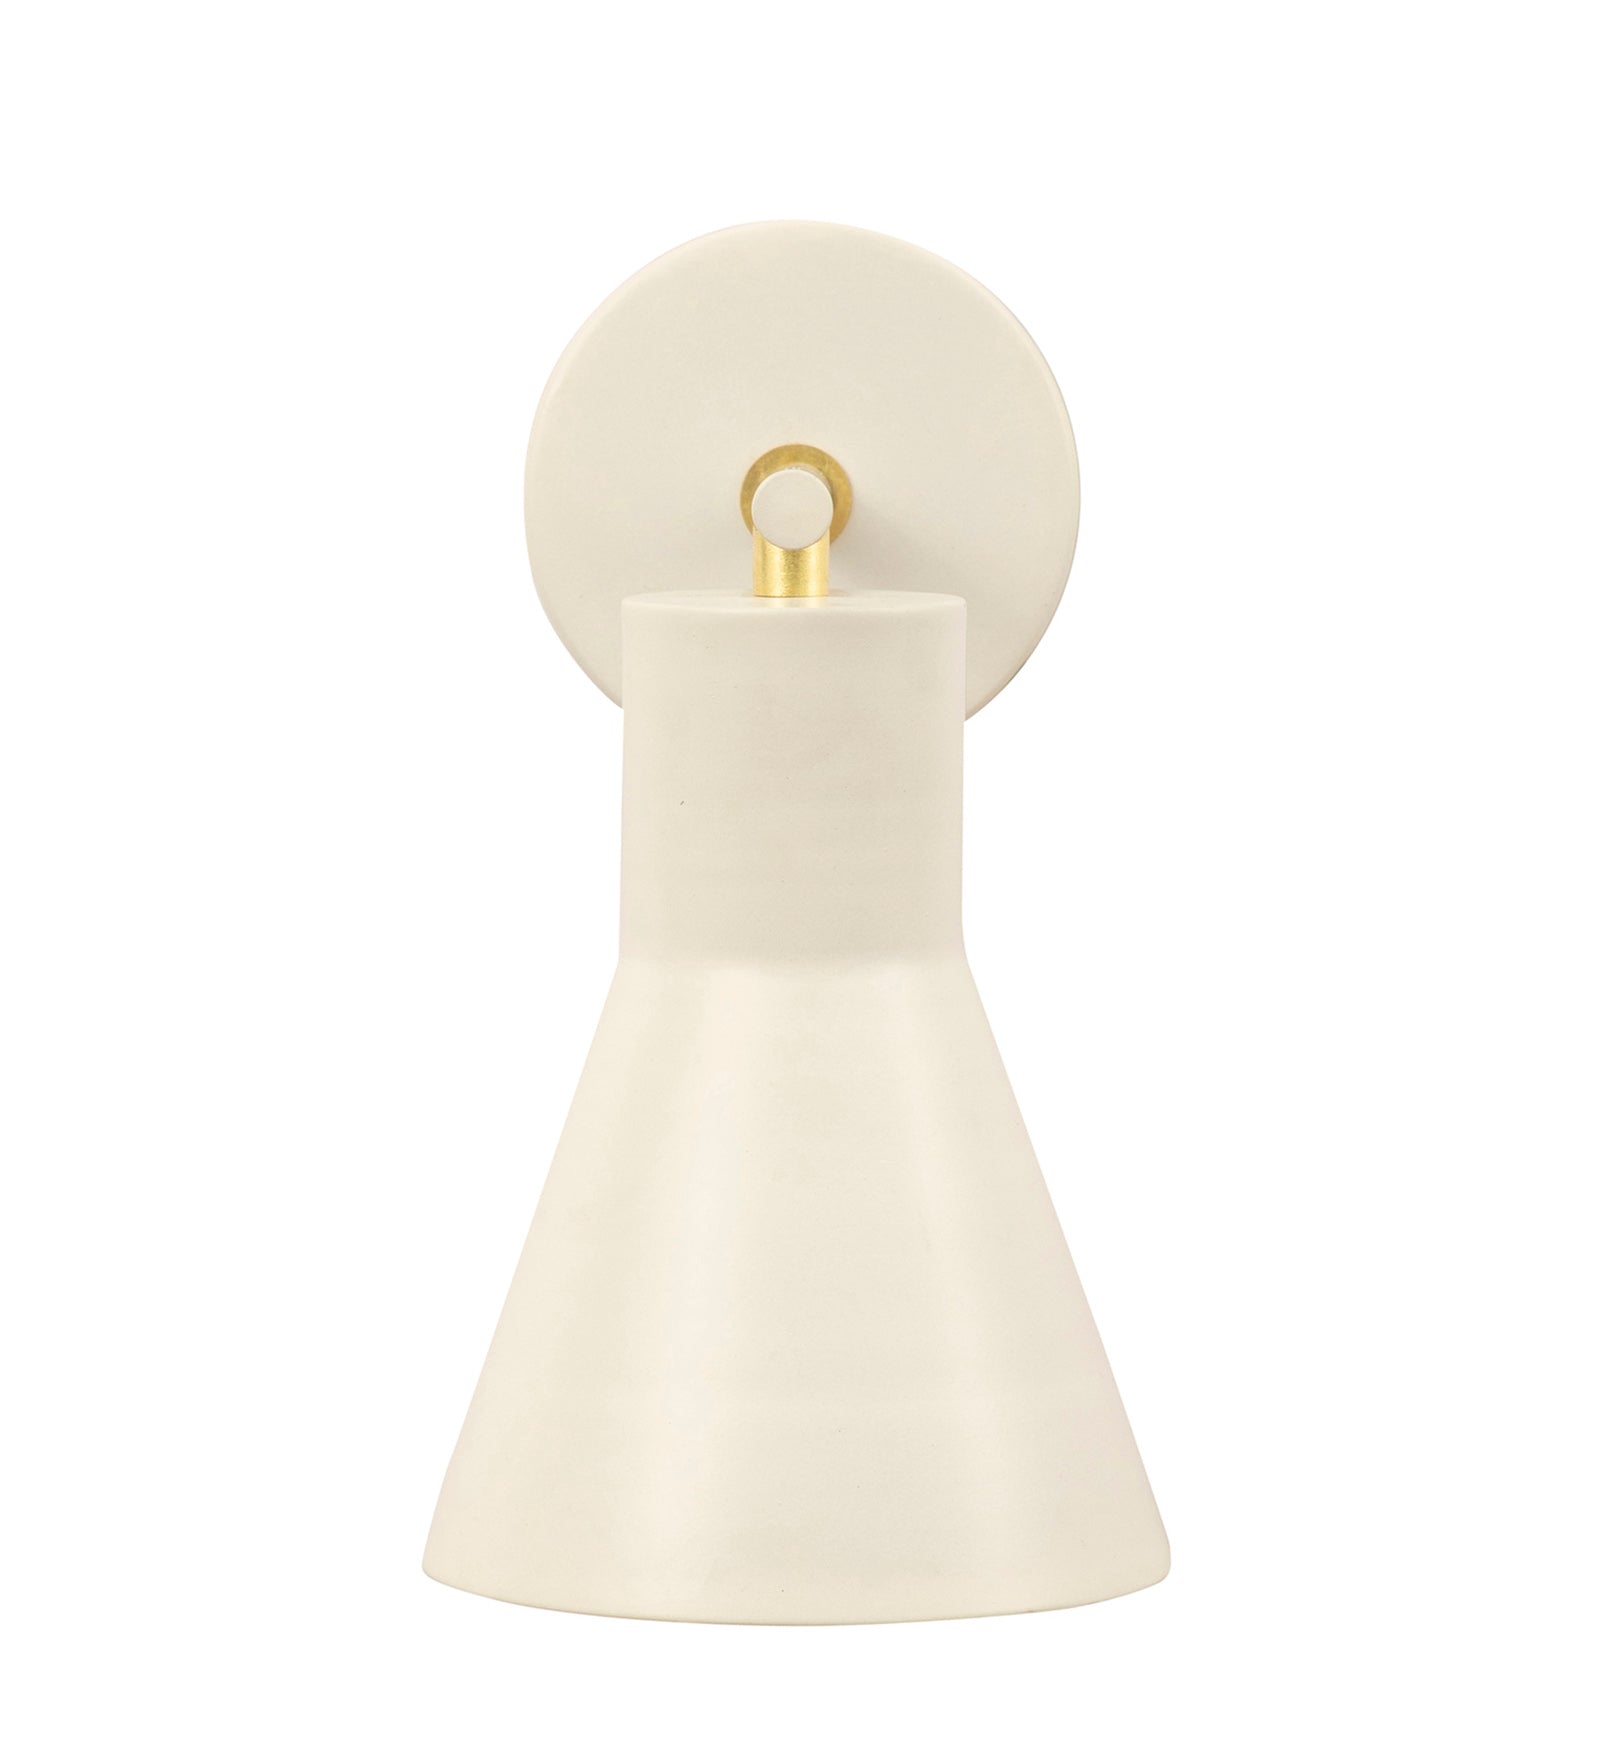 Float Aricolo Wall Sconce